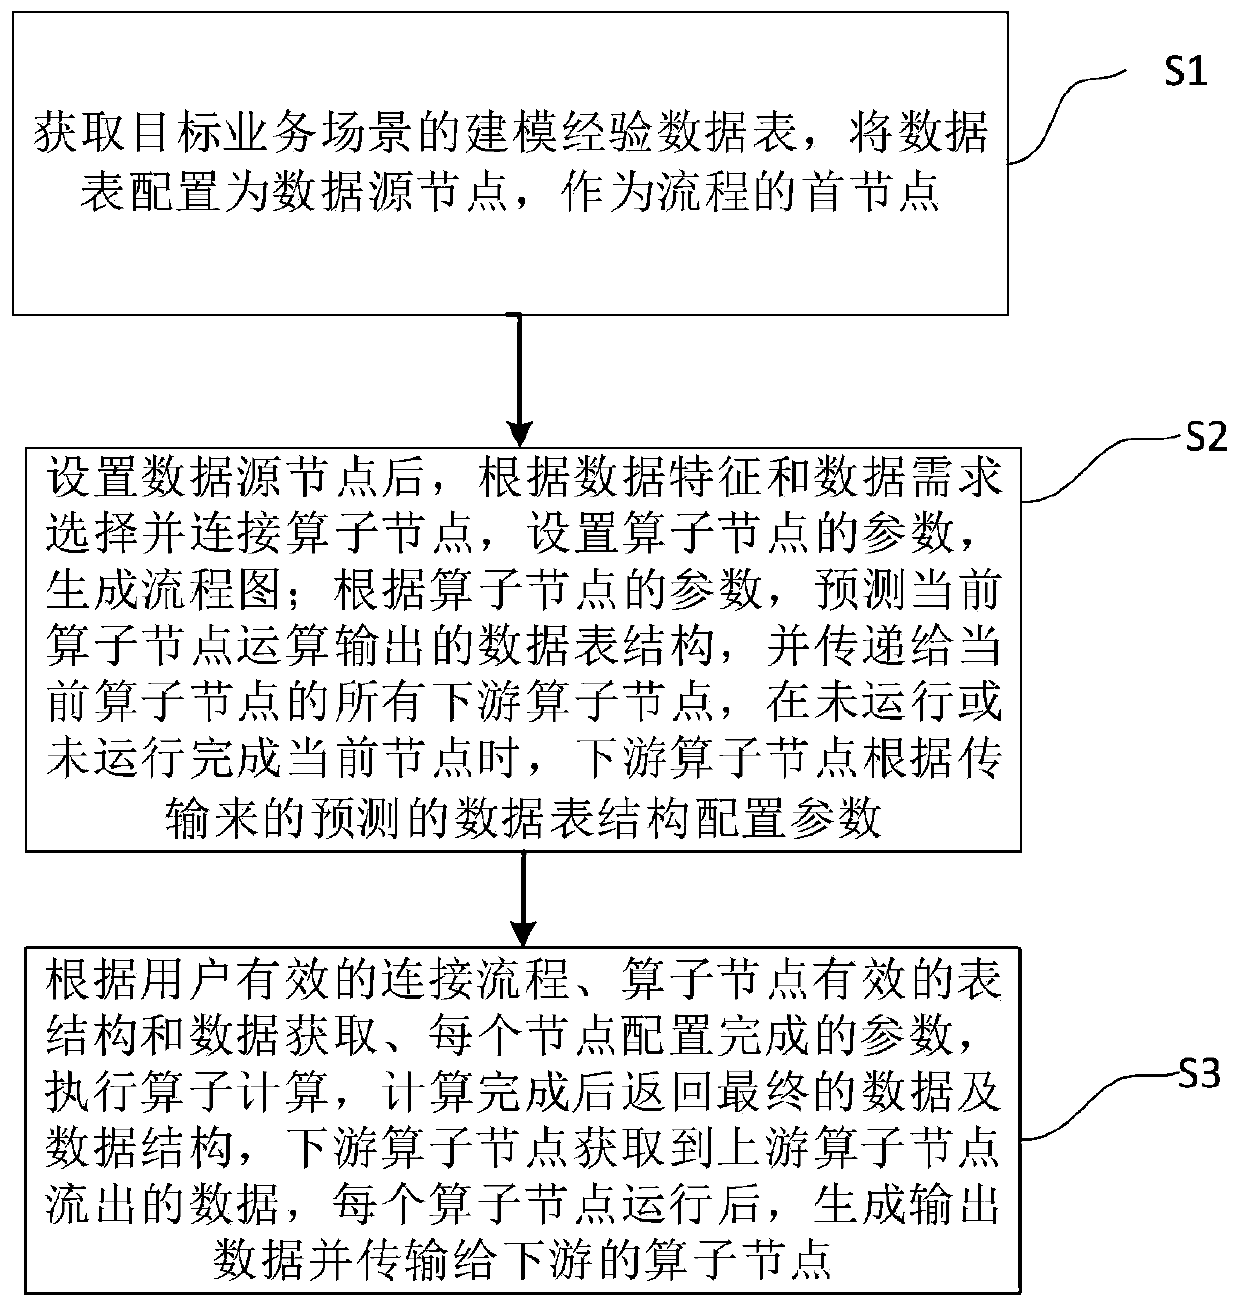 Data structure prediction transmission and automatic data processing method based on flow chart